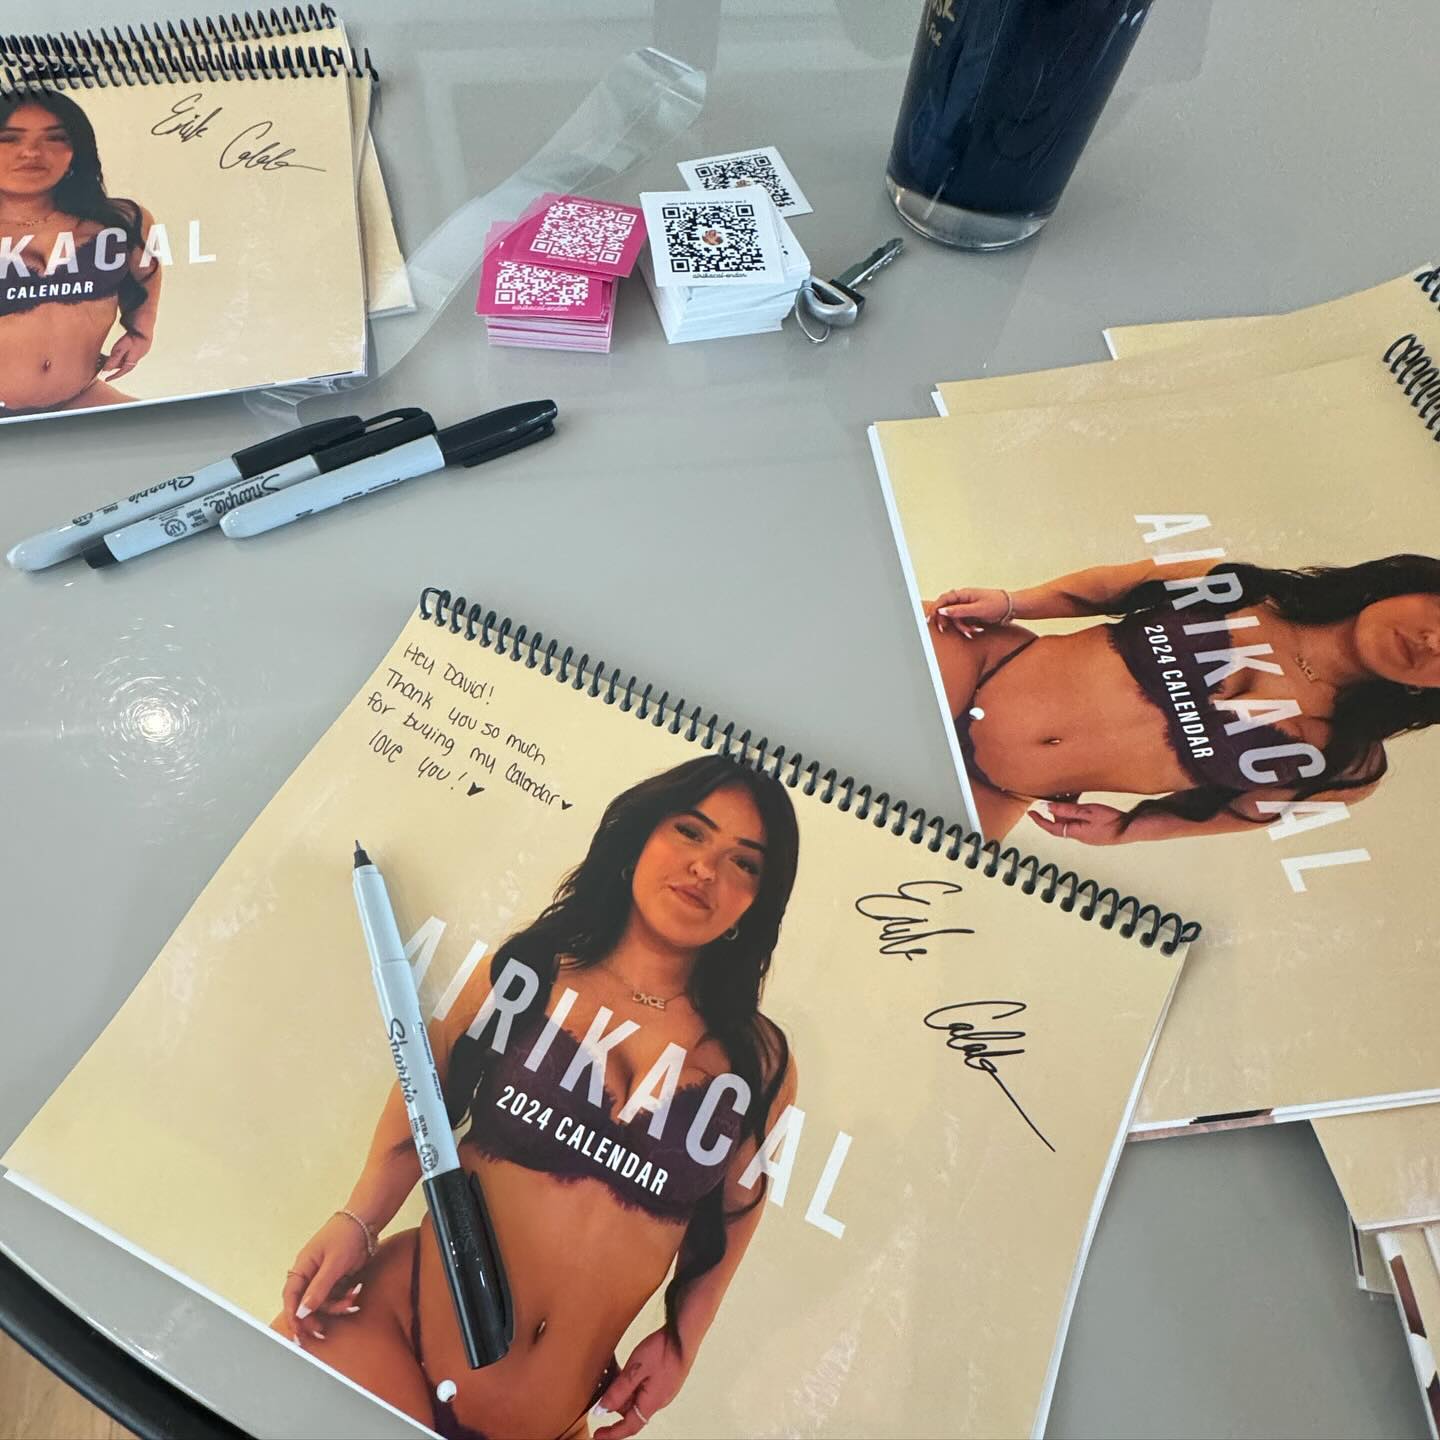 The time has come👀 the calendars are here! So sorry for the wait but I promise it’ll be worth it😏 signing them as we speak ✍️ link in bio